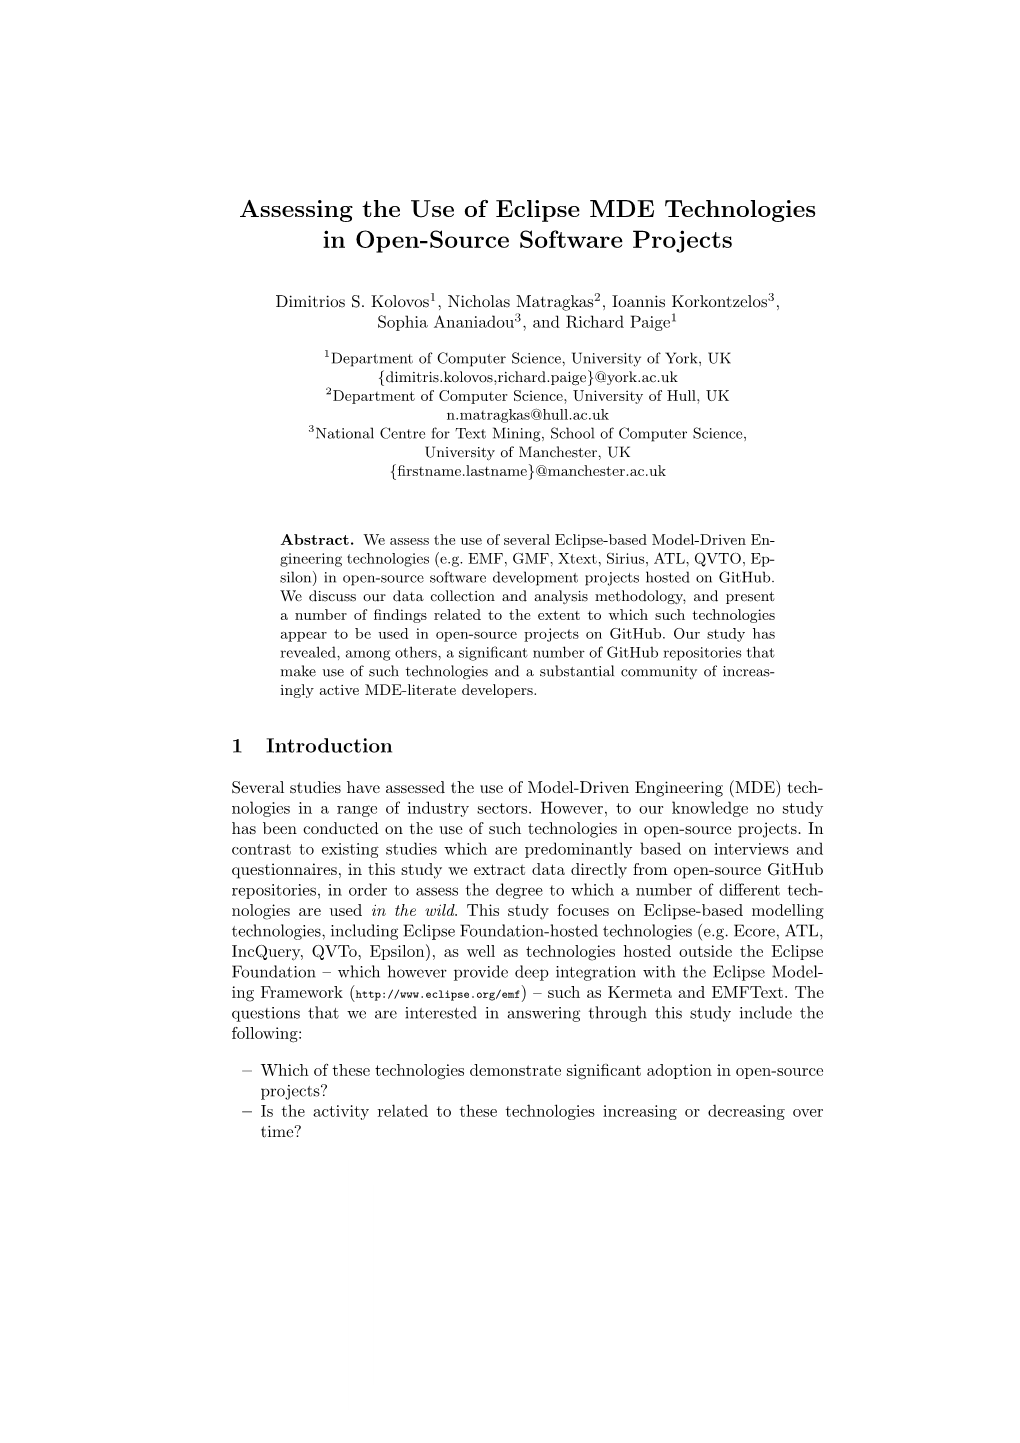 Assessing the Use of Eclipse MDE Technologies in Open-Source Software Projects